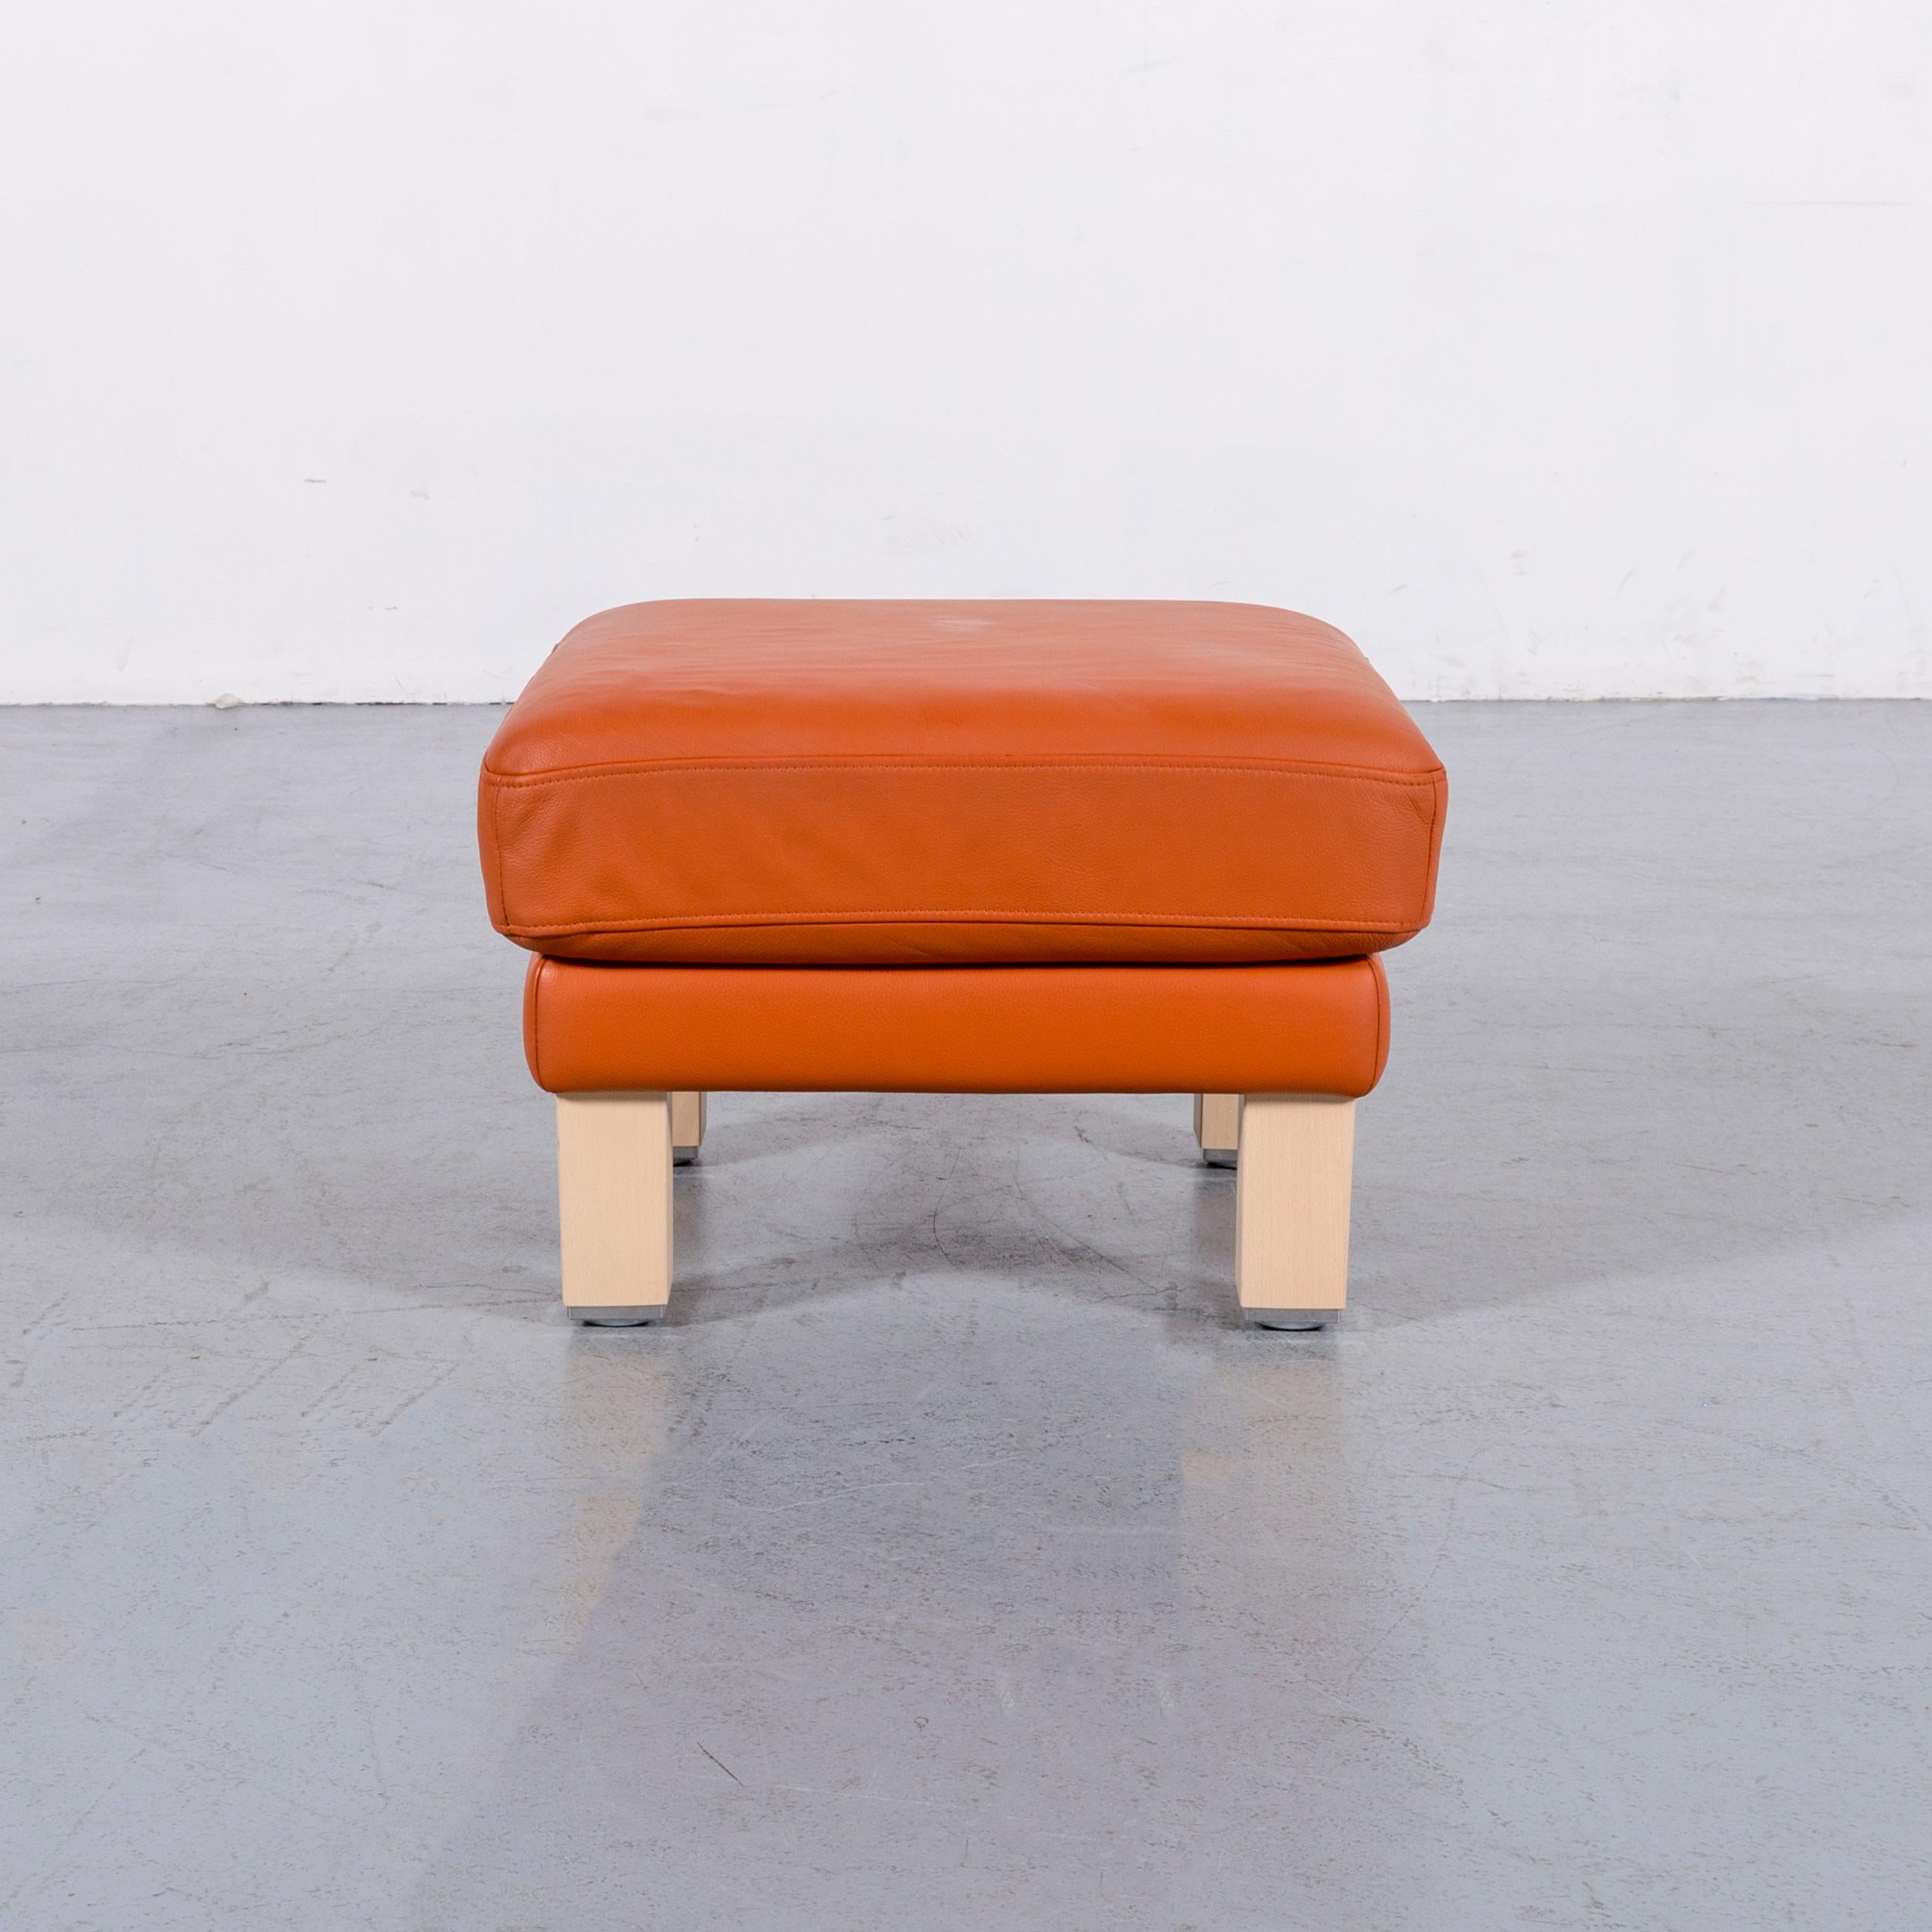 We bring to you an Rolf Benz leather foot-stool orange bench.






























   